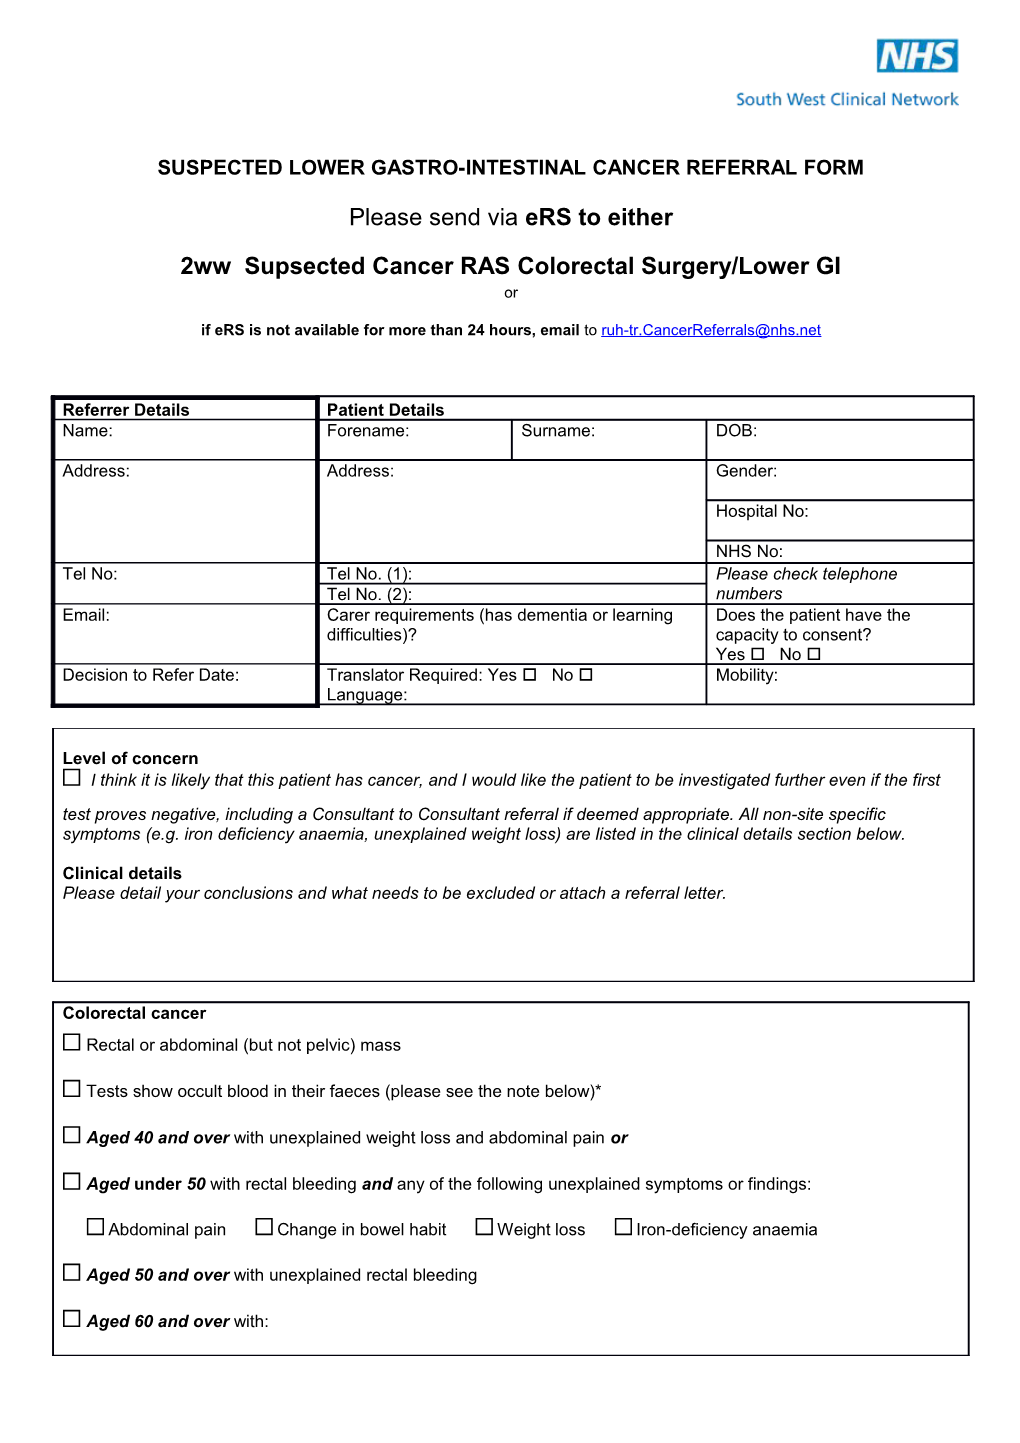 Suspected Lower Gastro-Intestinal Cancer Referral Form